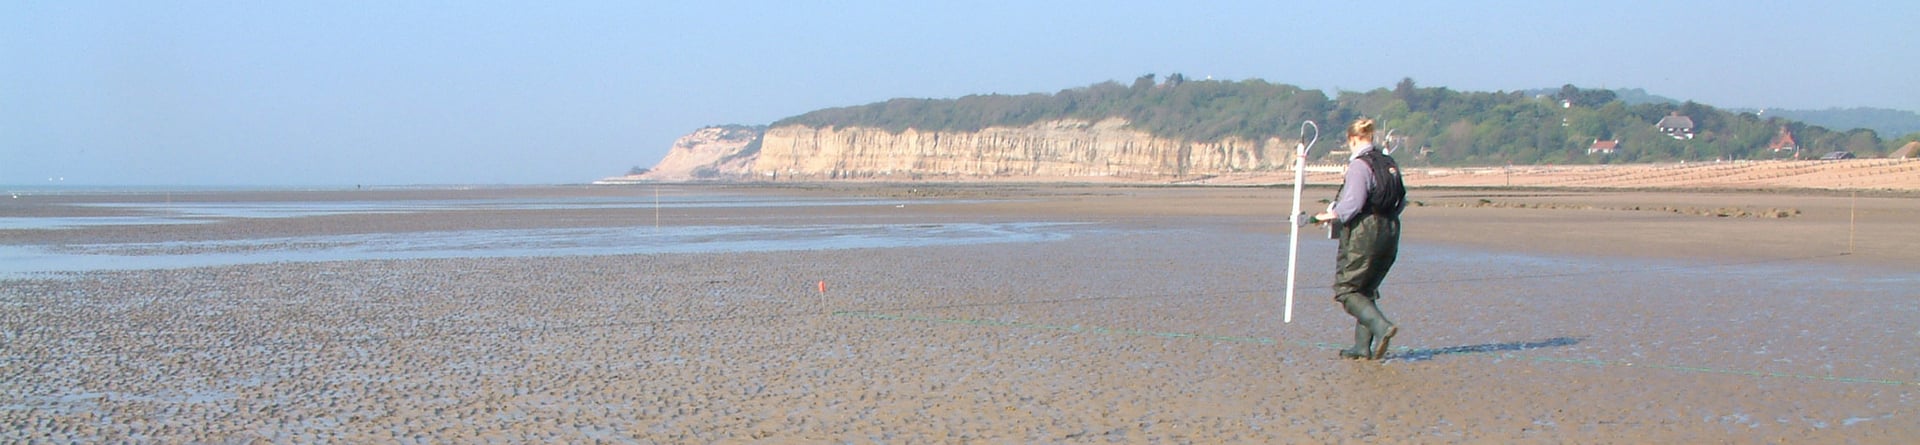 Colour photograph showing a woman in waders walking with a metal frame across a beach with low cliffs in the background